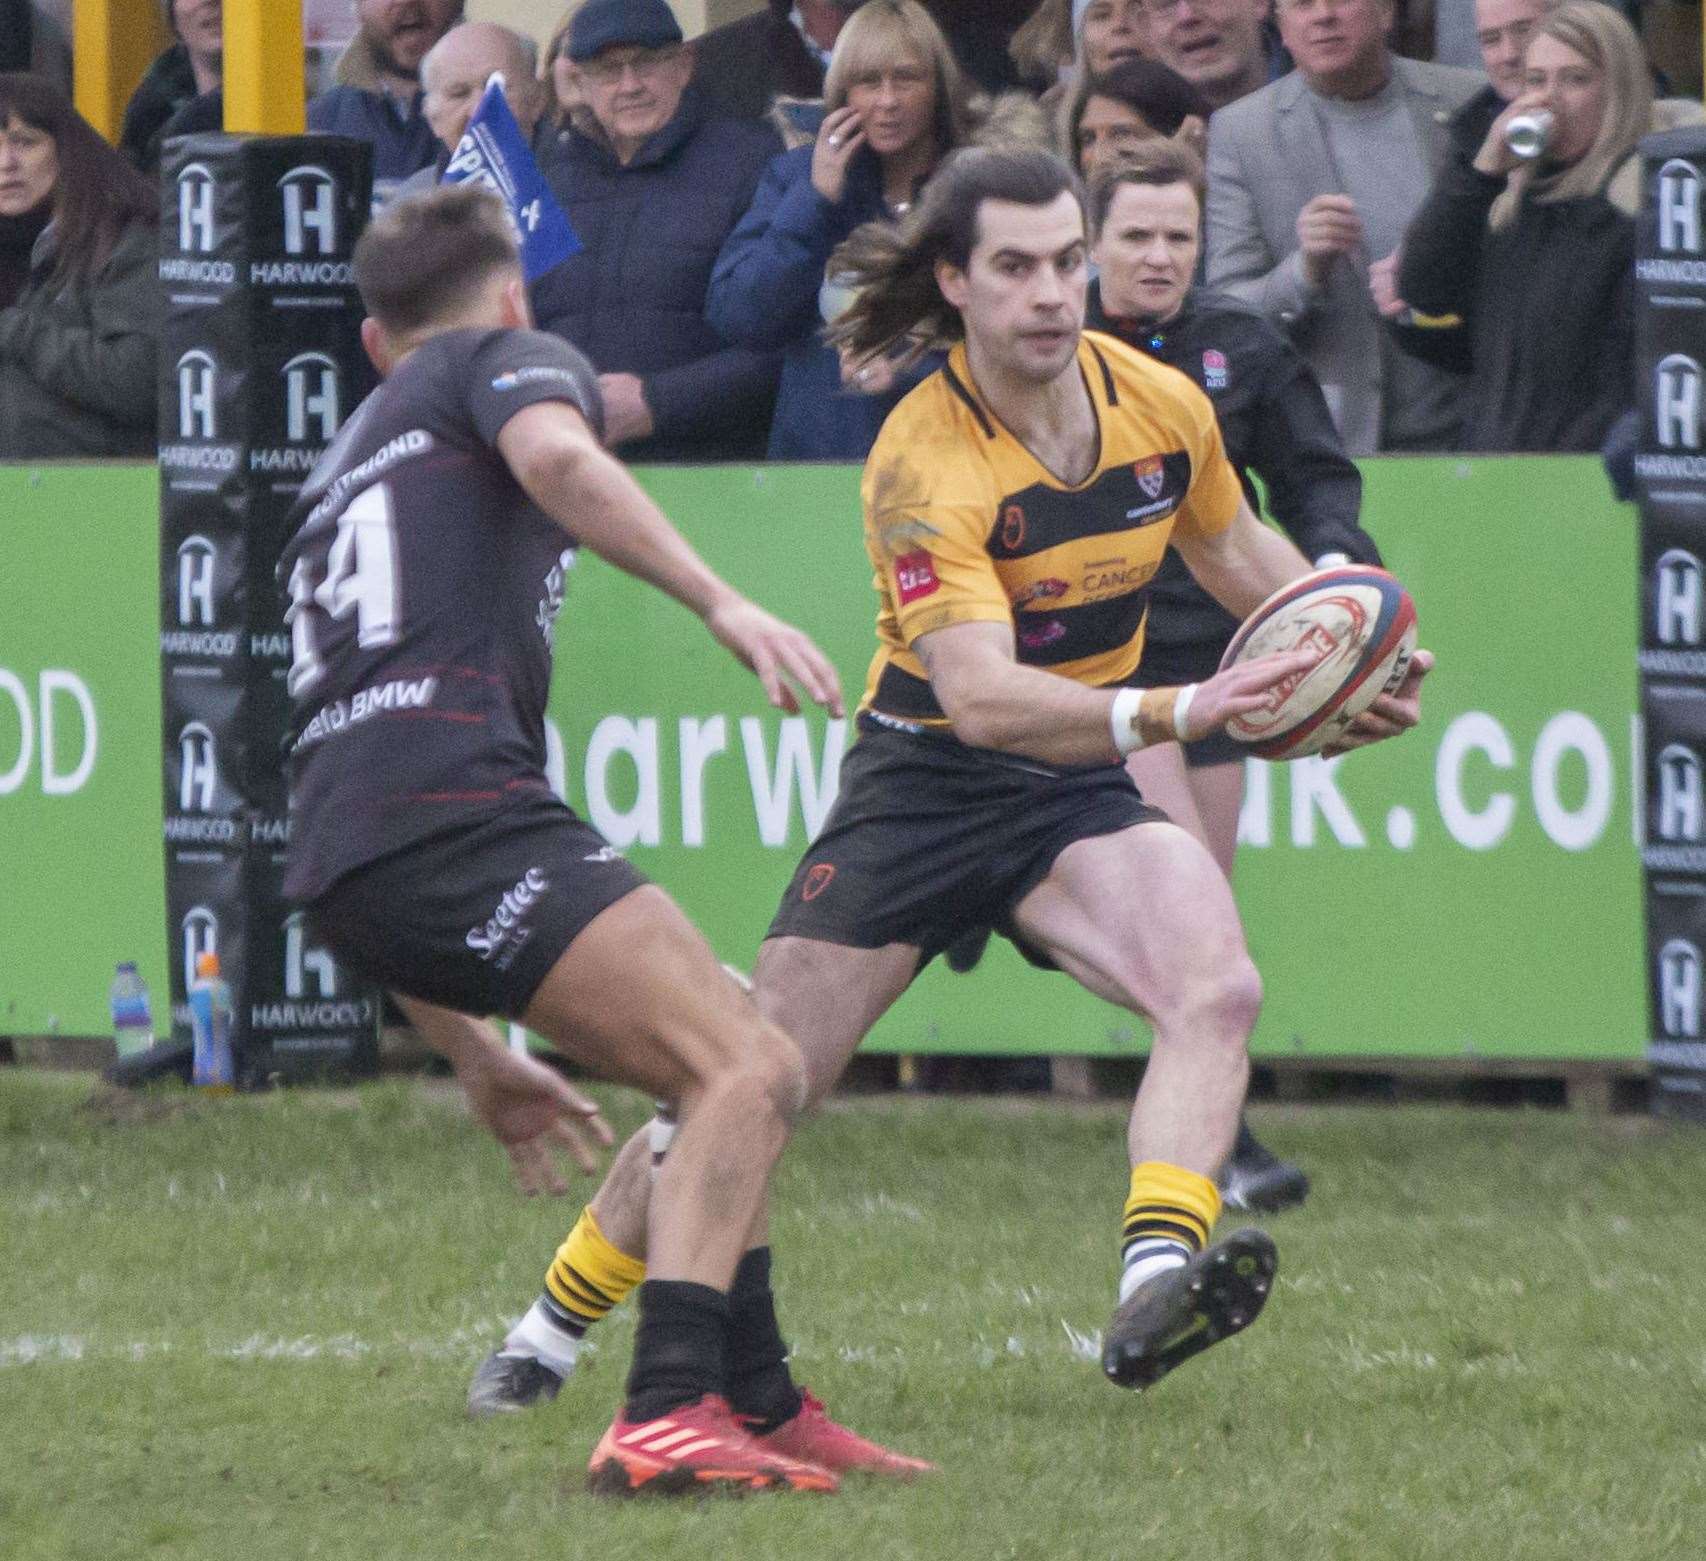 Canterbury ran in seven tries against Rochford Hundred, Dwayne Corcoran among the scorers. Picture: Phillipa Hilton